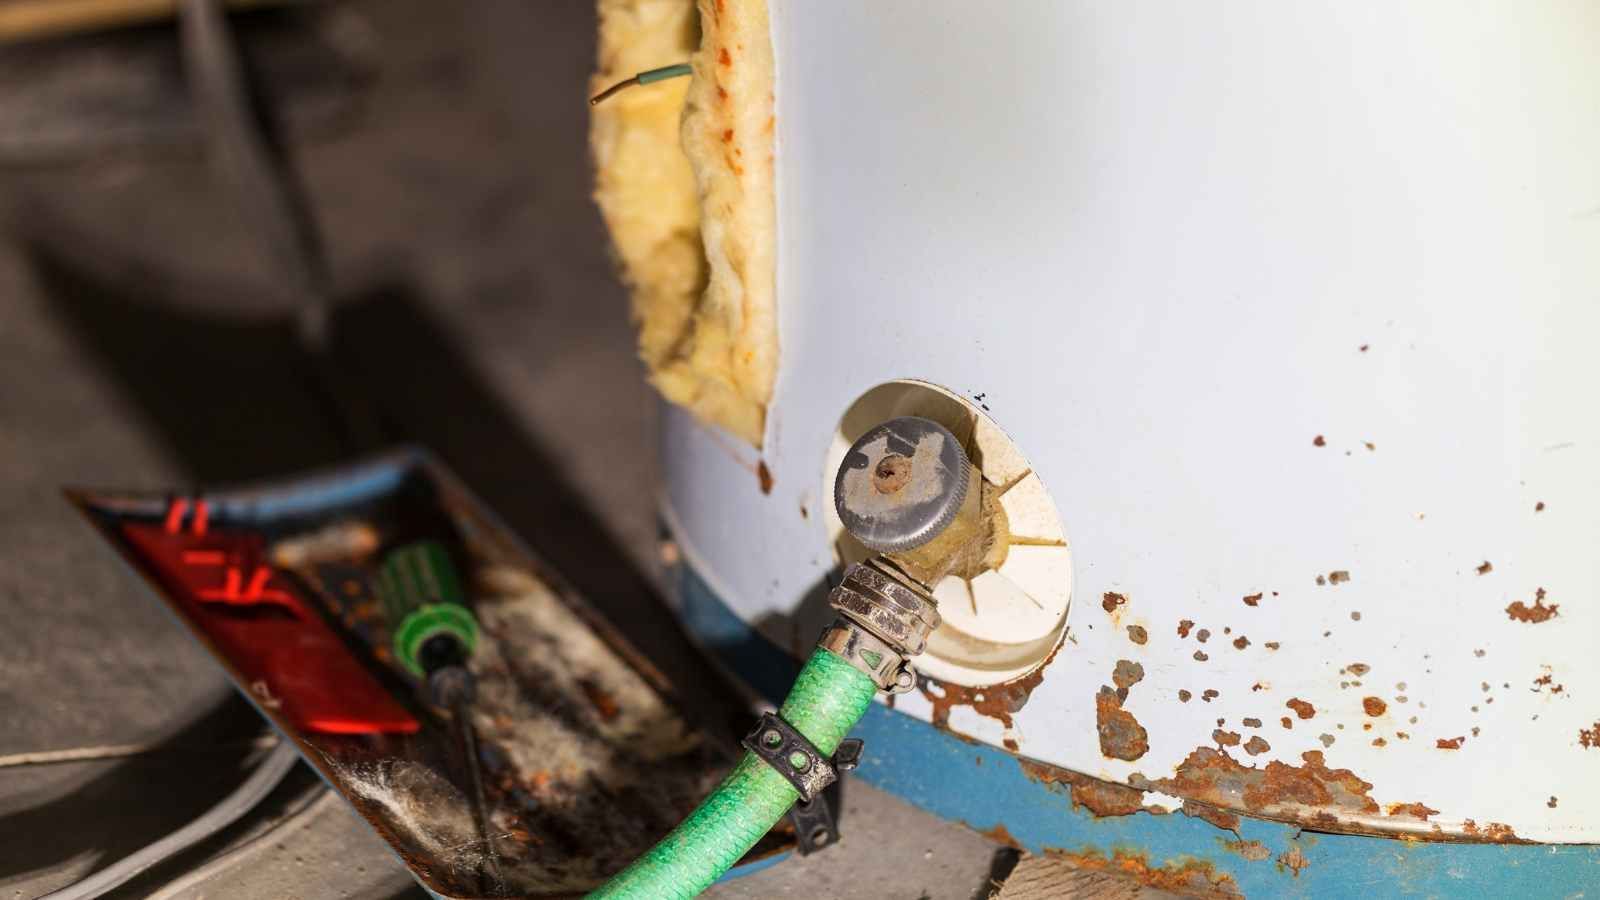 Evidence that a replacement water heater is needed with a picture of a damaged tank.